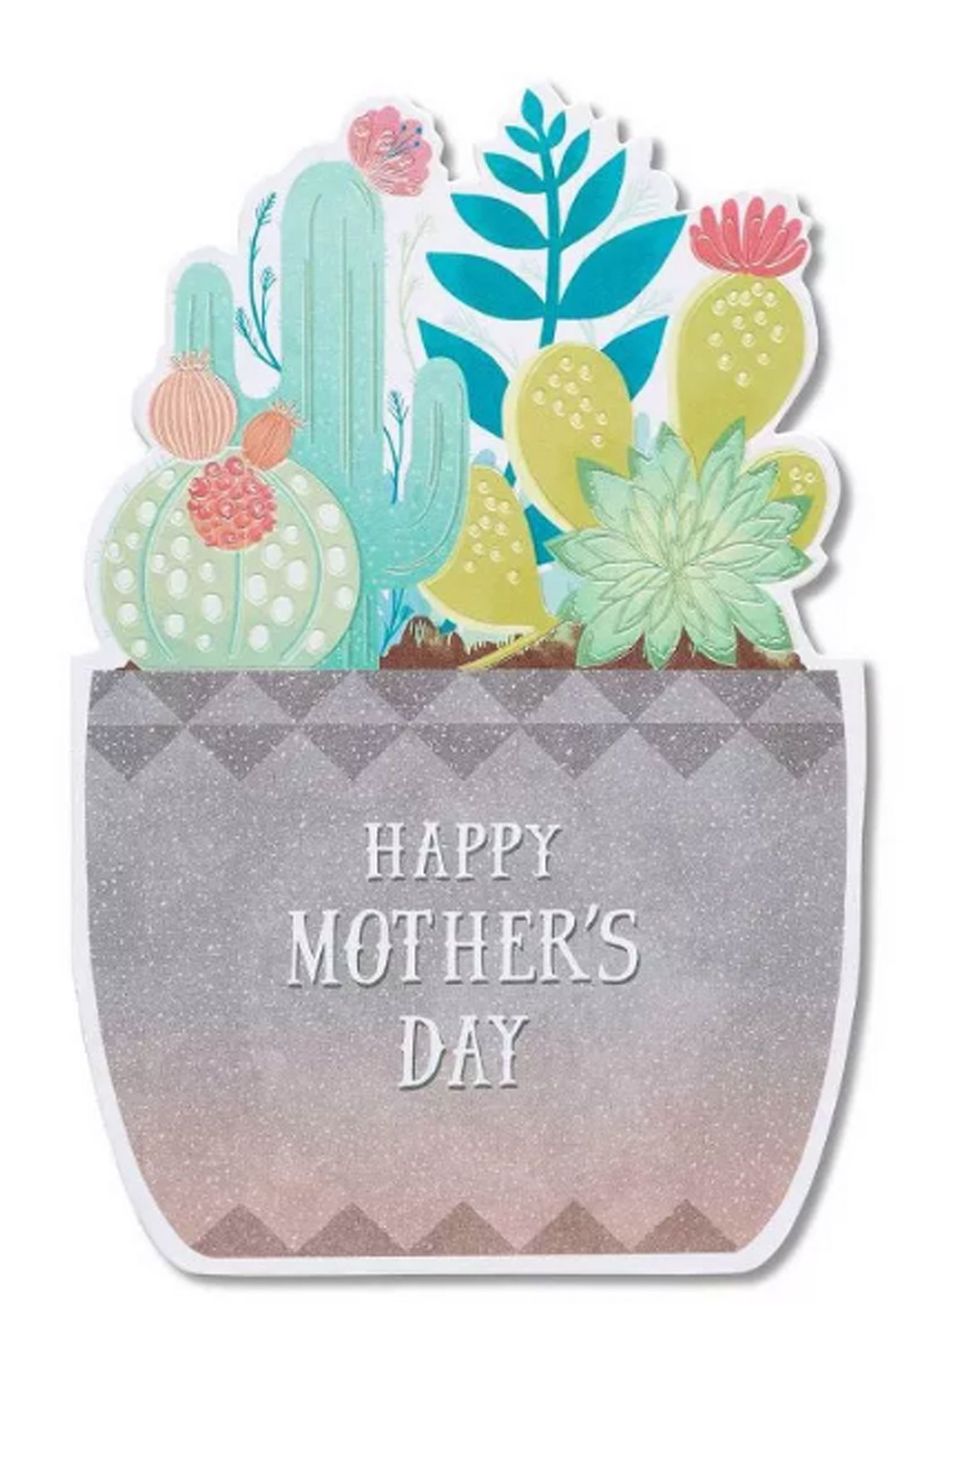 "Happy Mother's Day Card" Succulent With Foil